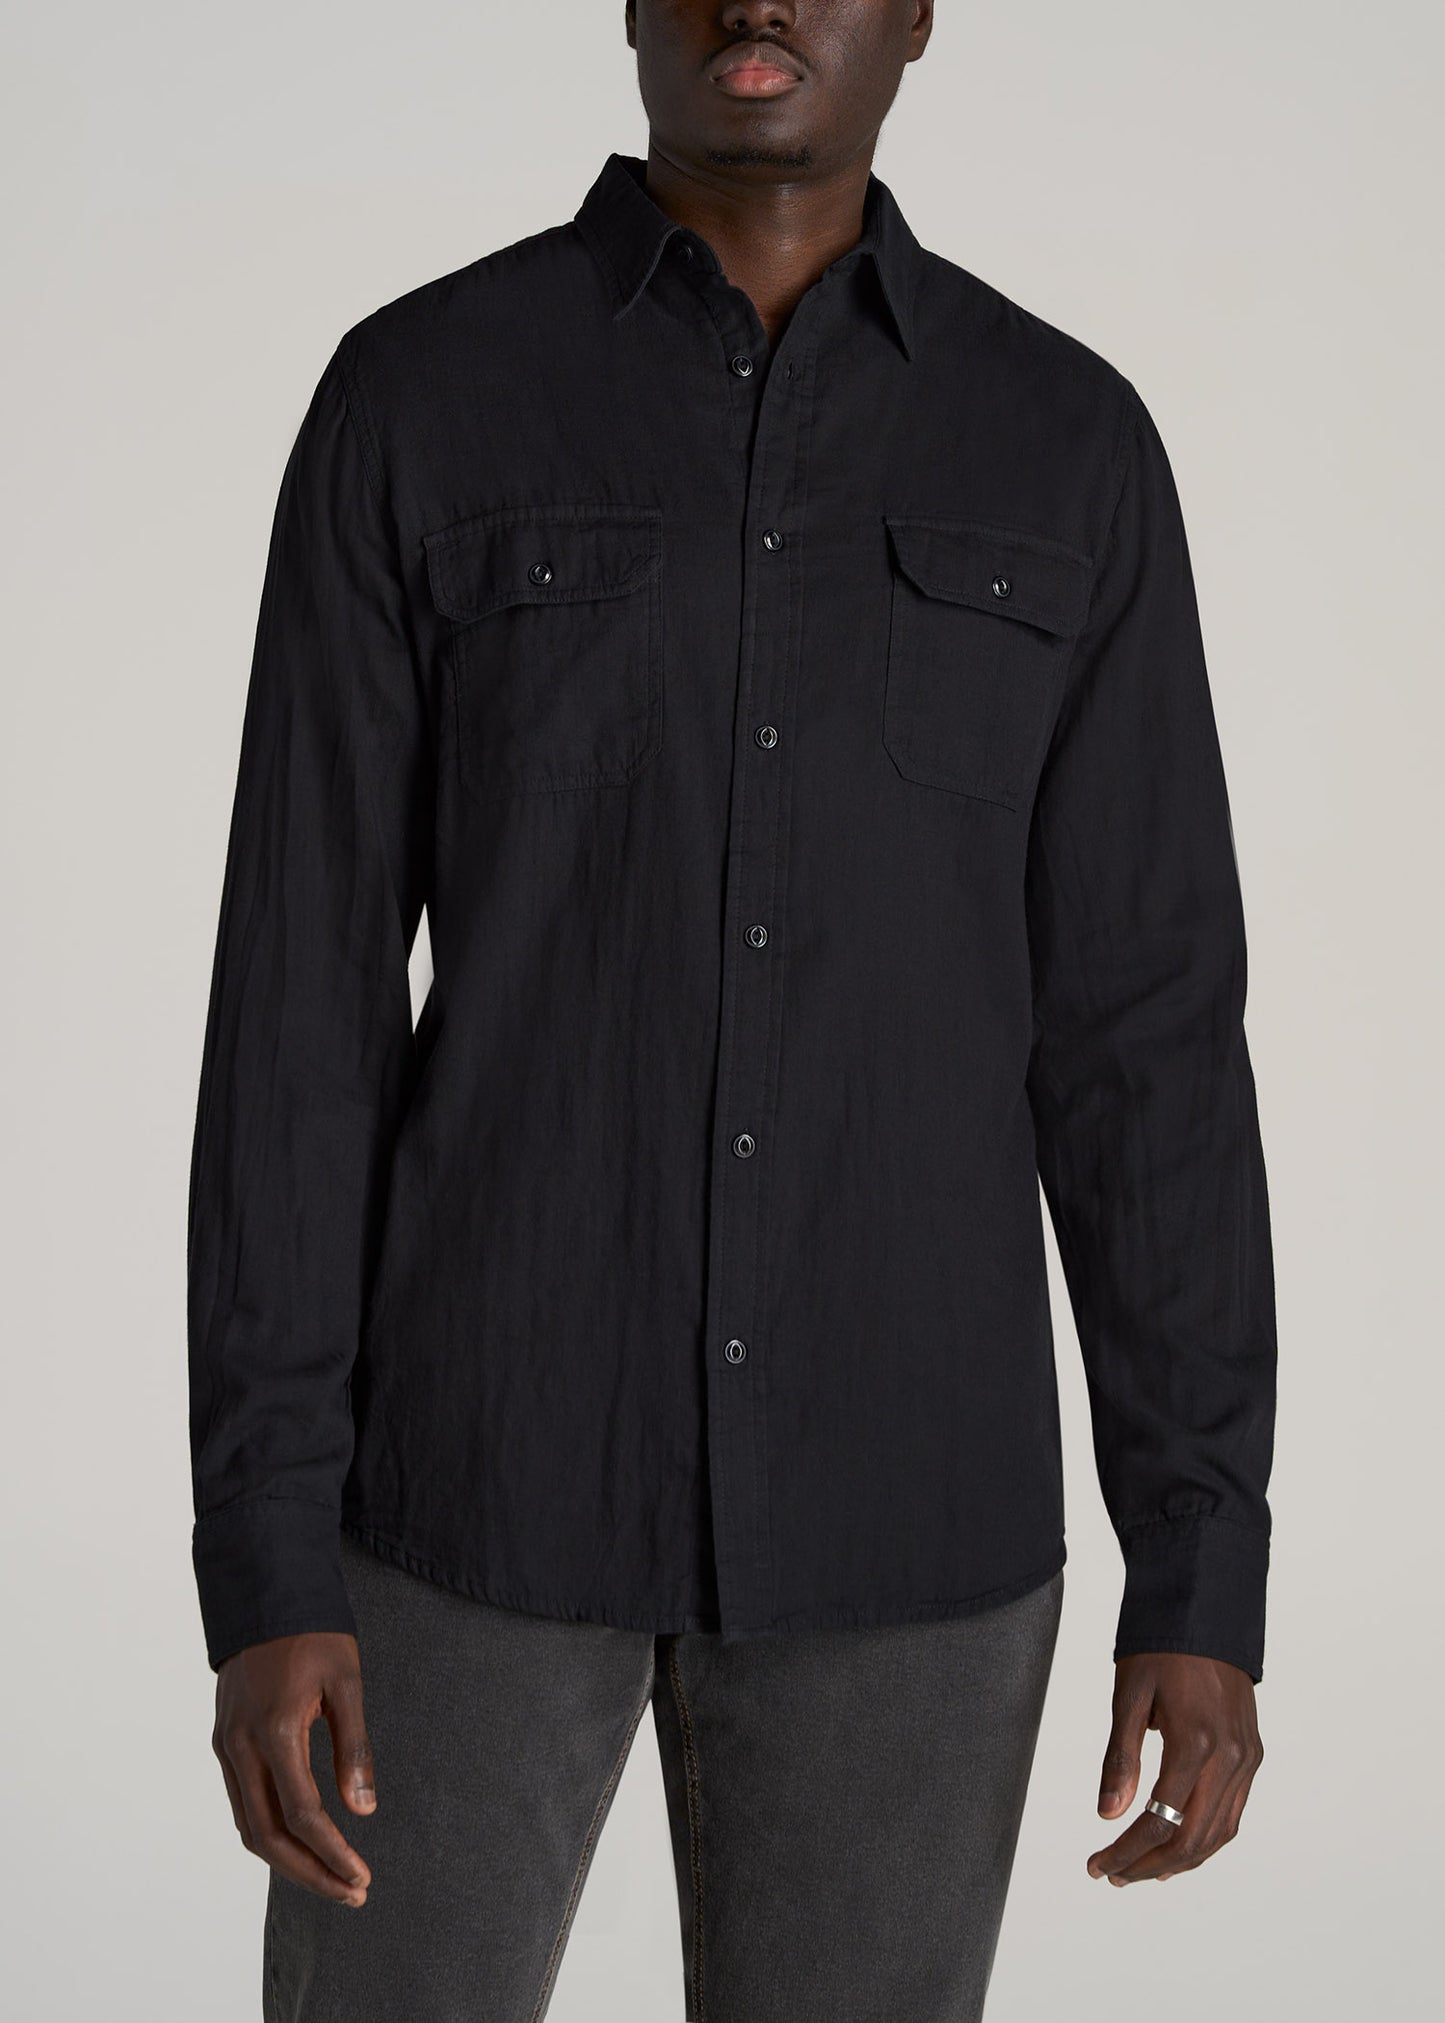     American-Tall-Men-Double-Weave-Shirt-Vintage-Black-front